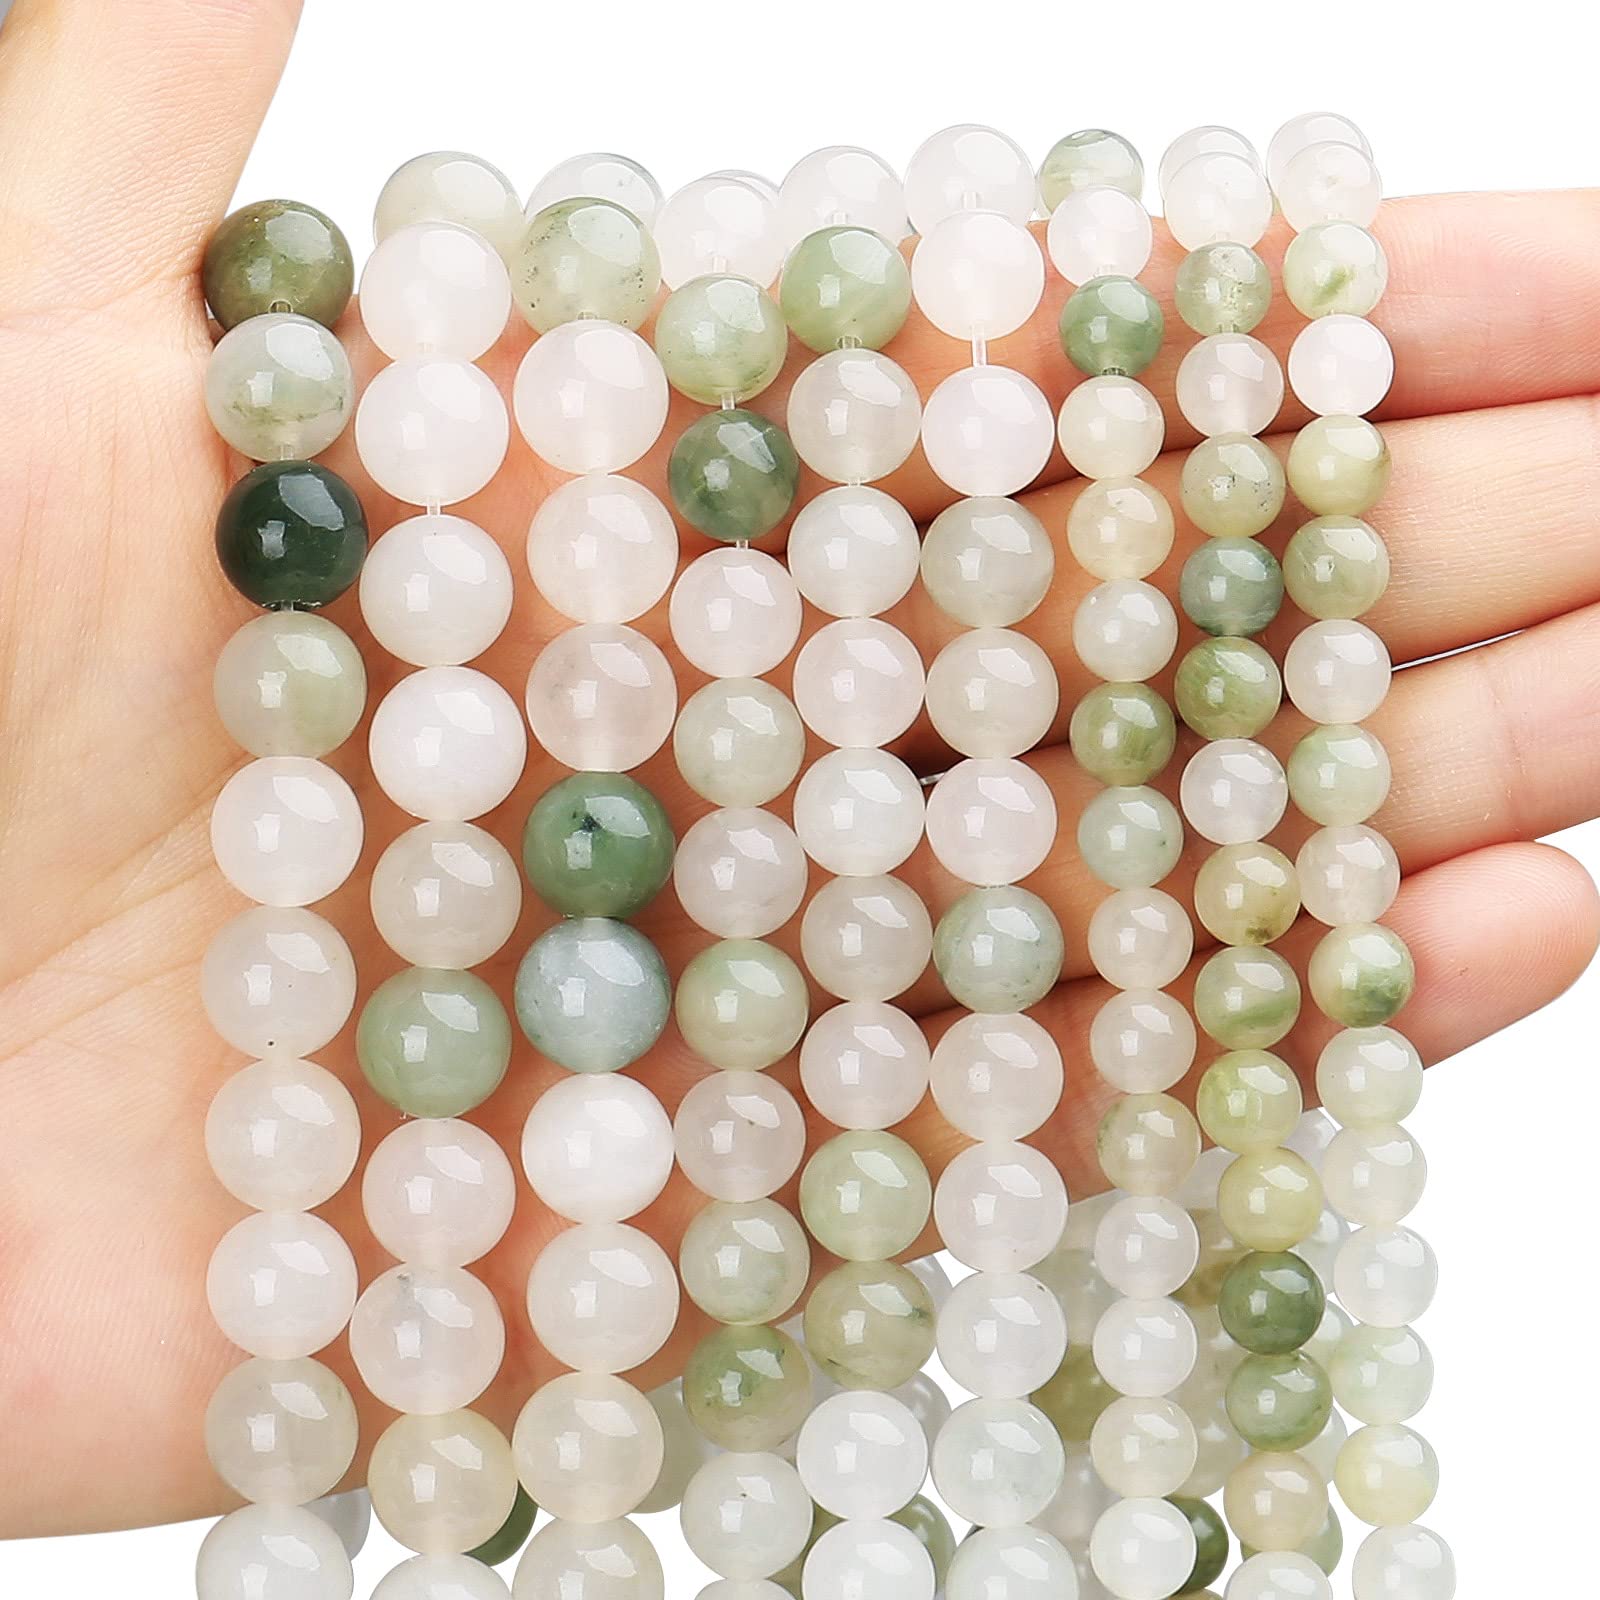 10mm Polished Smooth Iceberg Jade, Natural Gemstone Beads Round Semi Precious Loose Stones Energy Healing Crystals with Free Stretch Cord for Jewelry Making, DIY Bracelet Necklace